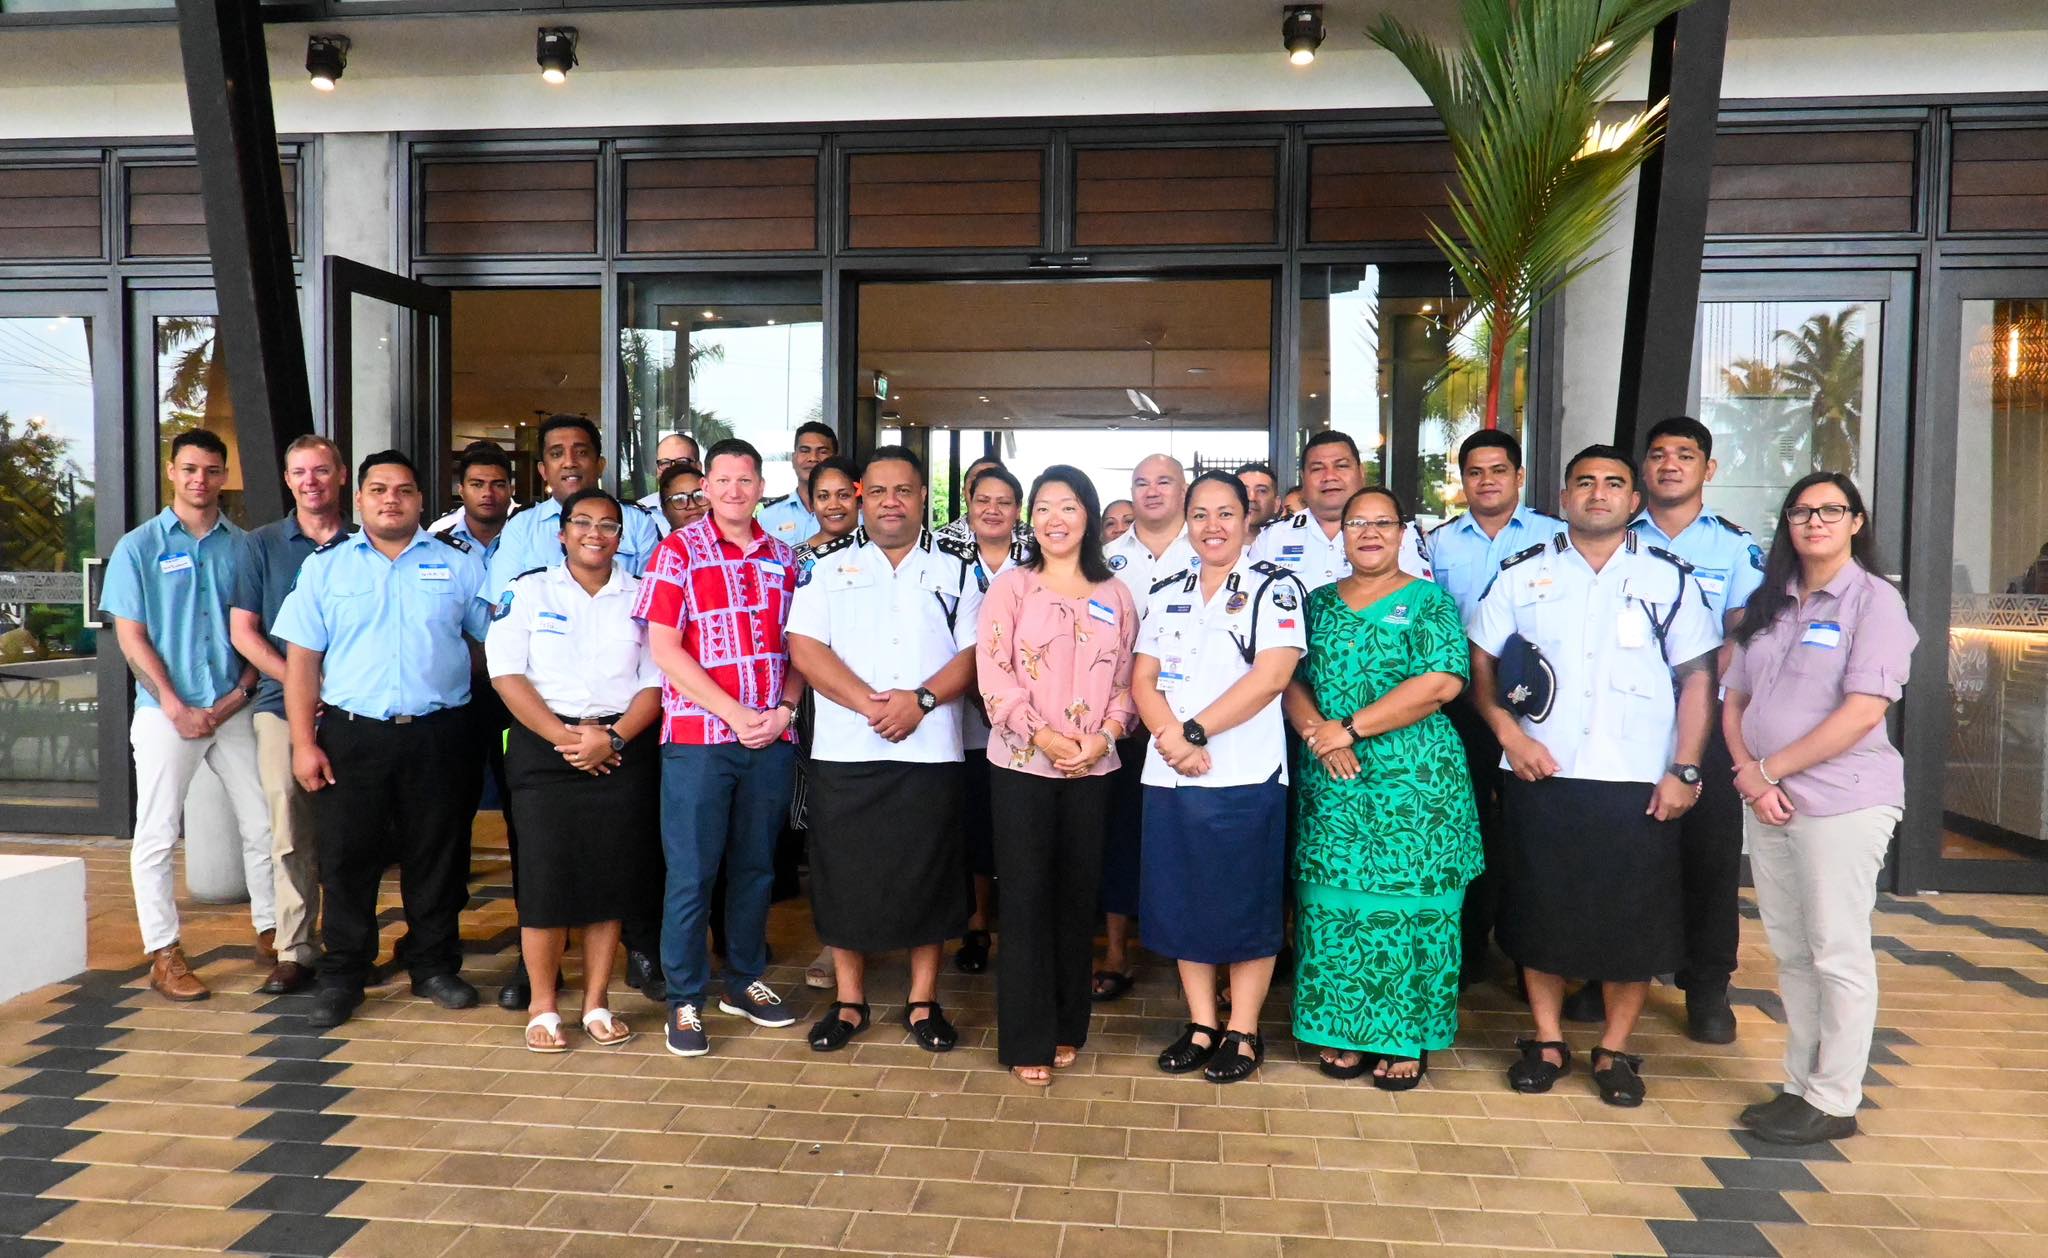 State Partnership Program exchange program commences between the State of Nevada and the Government of Samoa.